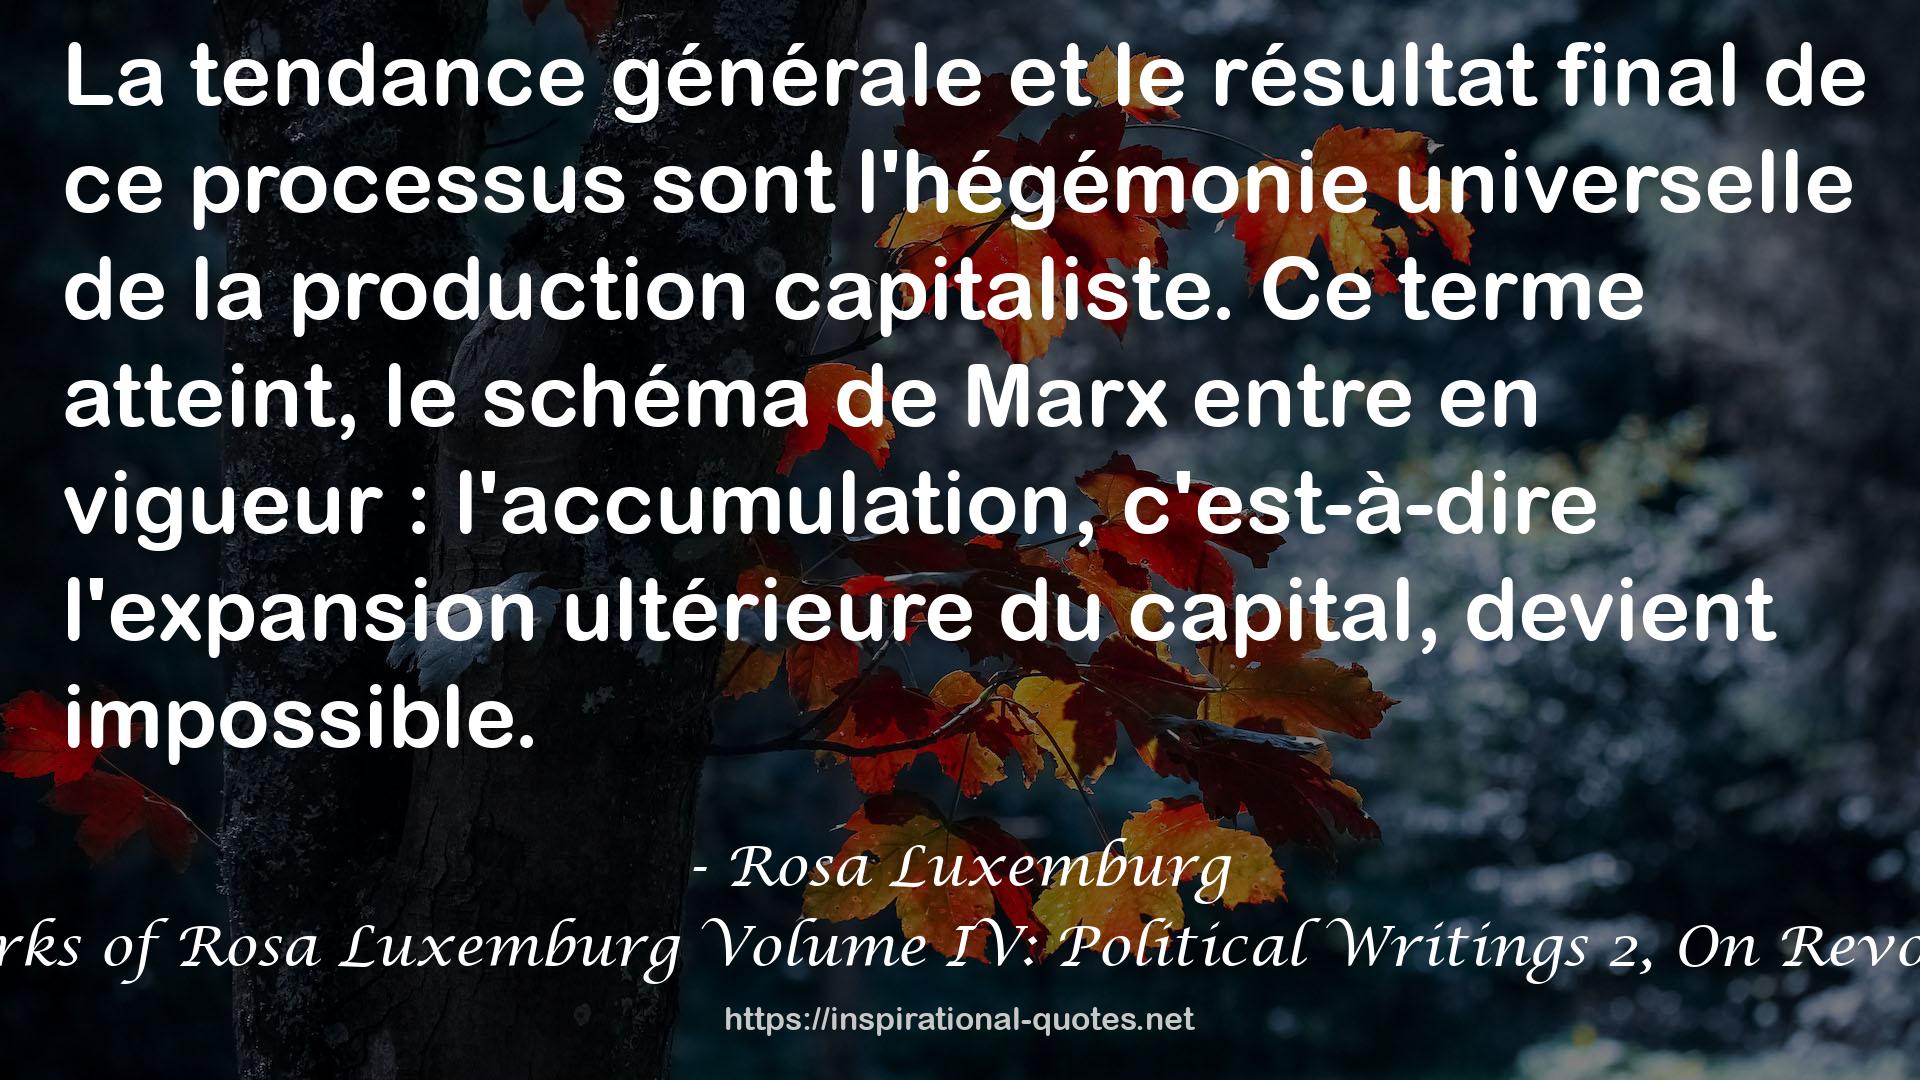 The Complete Works of Rosa Luxemburg Volume IV: Political Writings 2, On Revolution (1906-1909) QUOTES